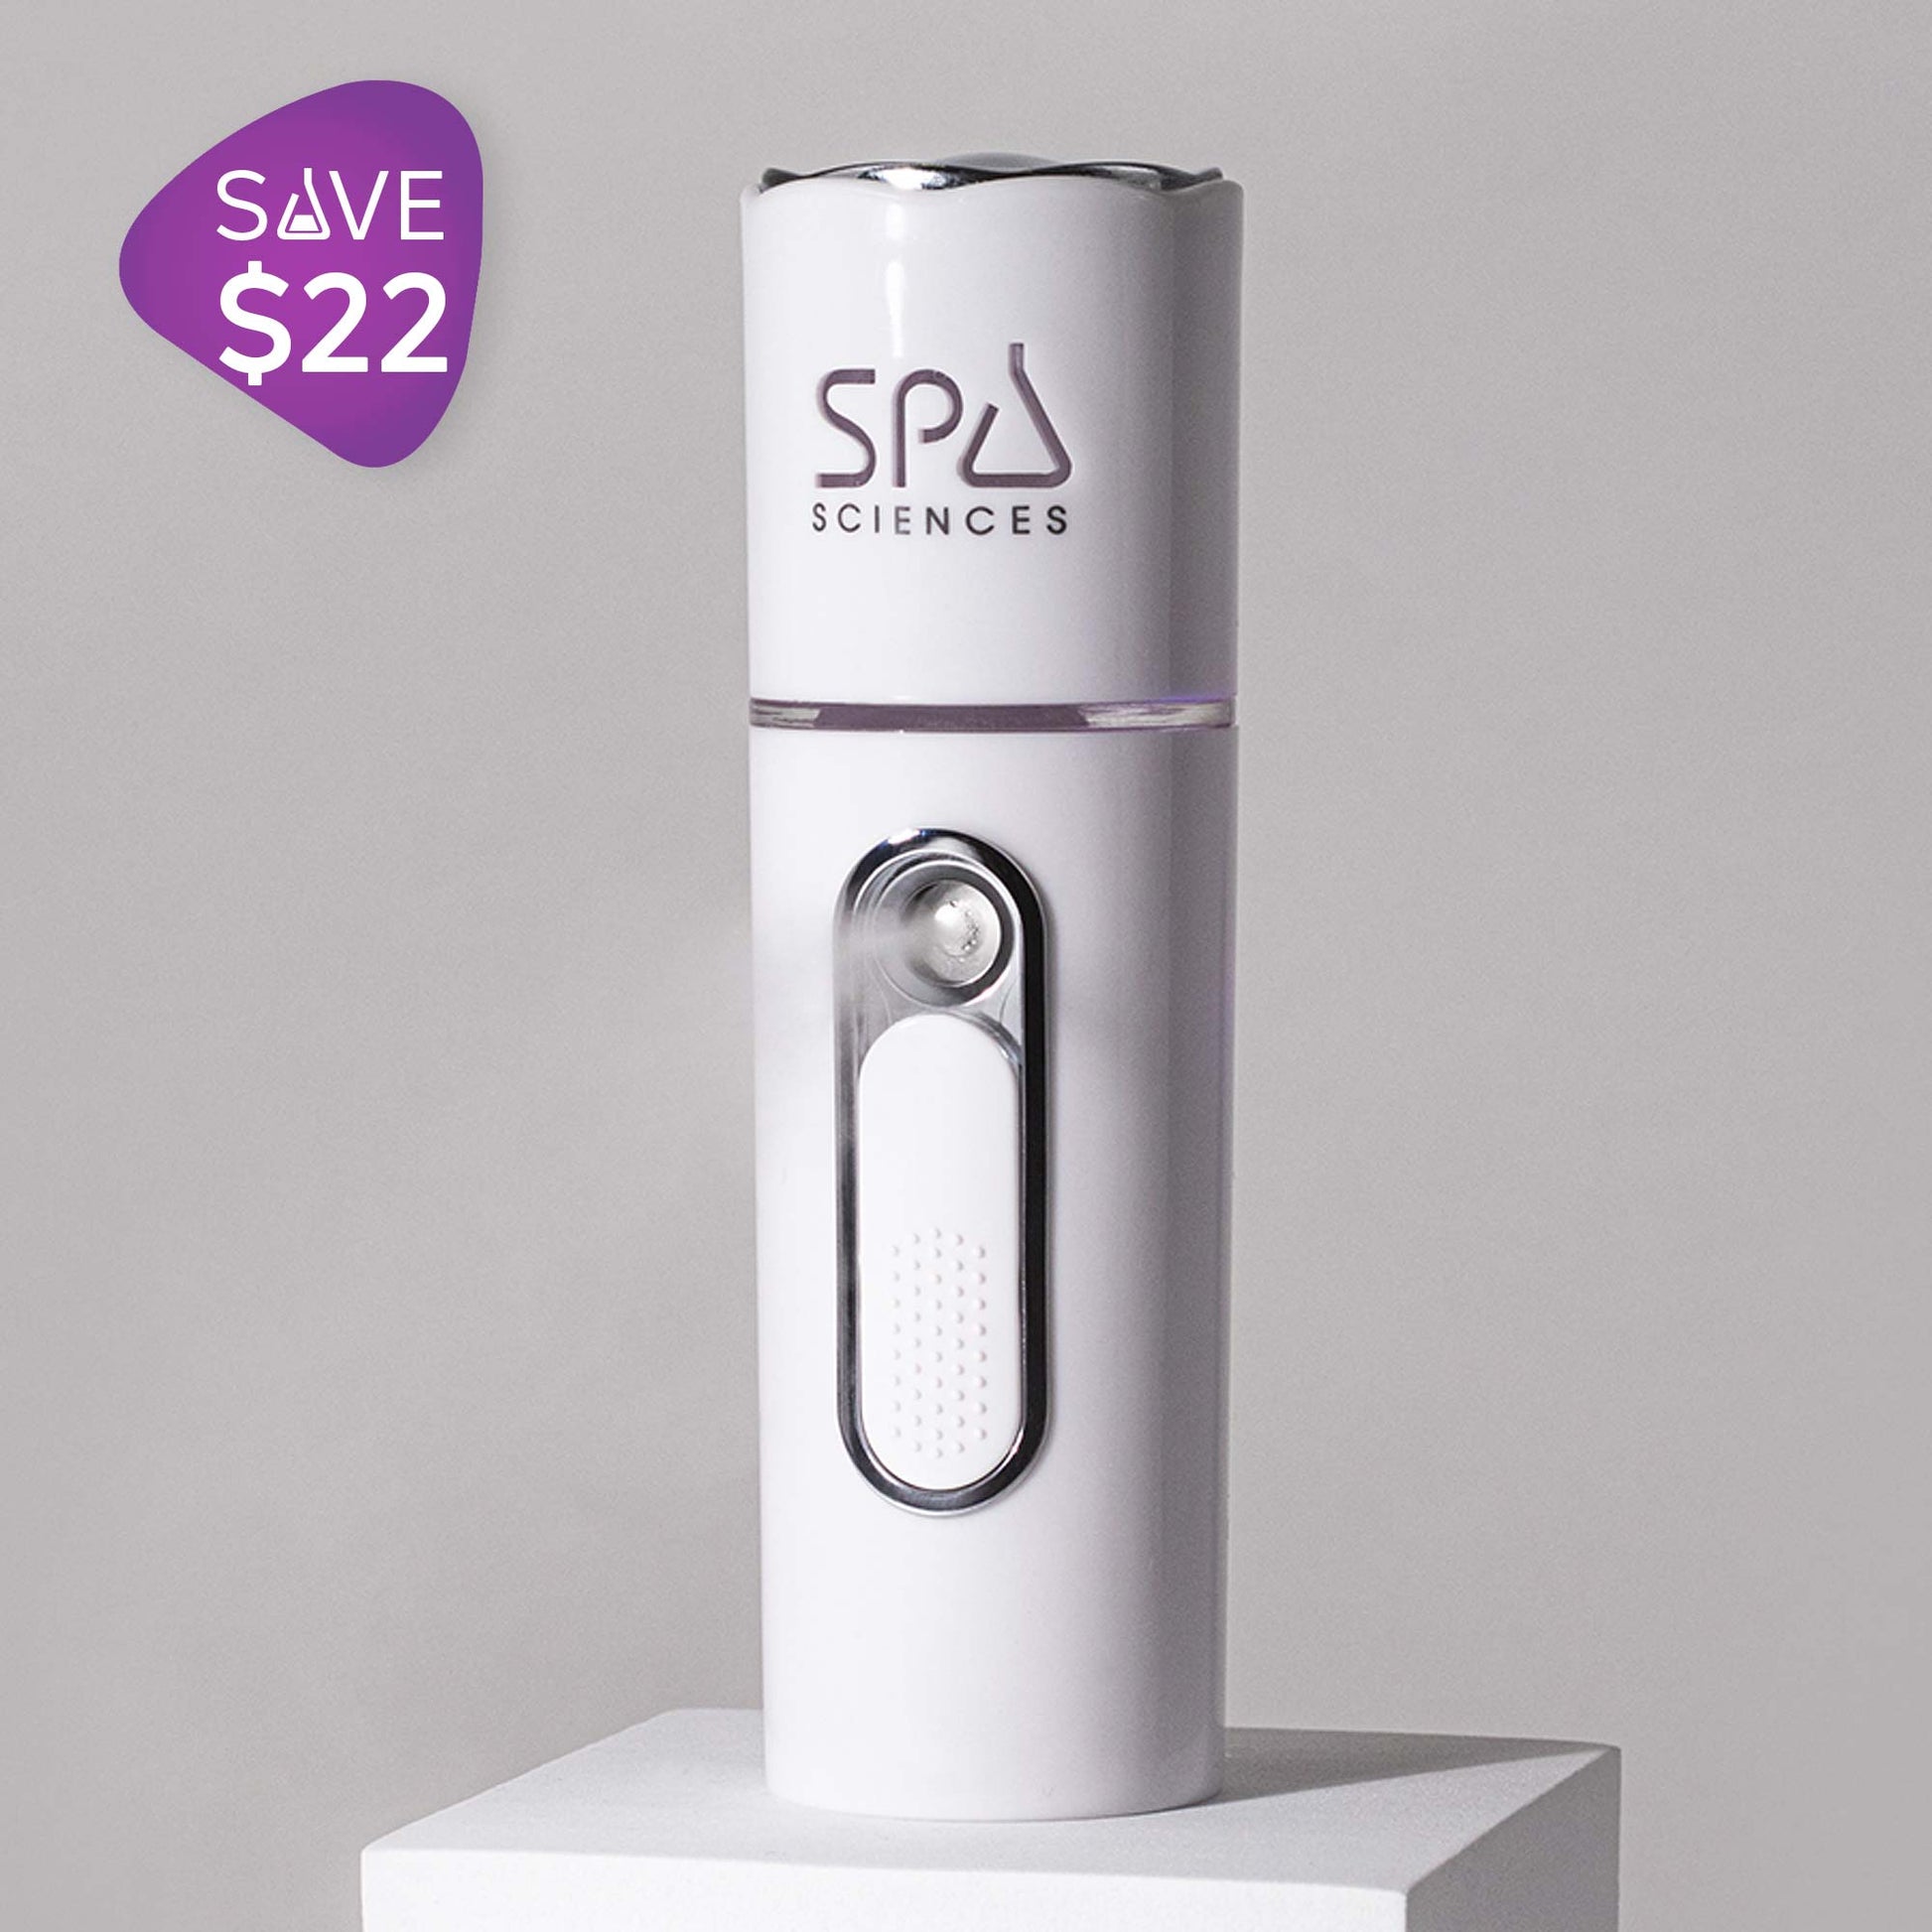 A white Spa Sciences On the Go Set on a stand with a price tag of $22.